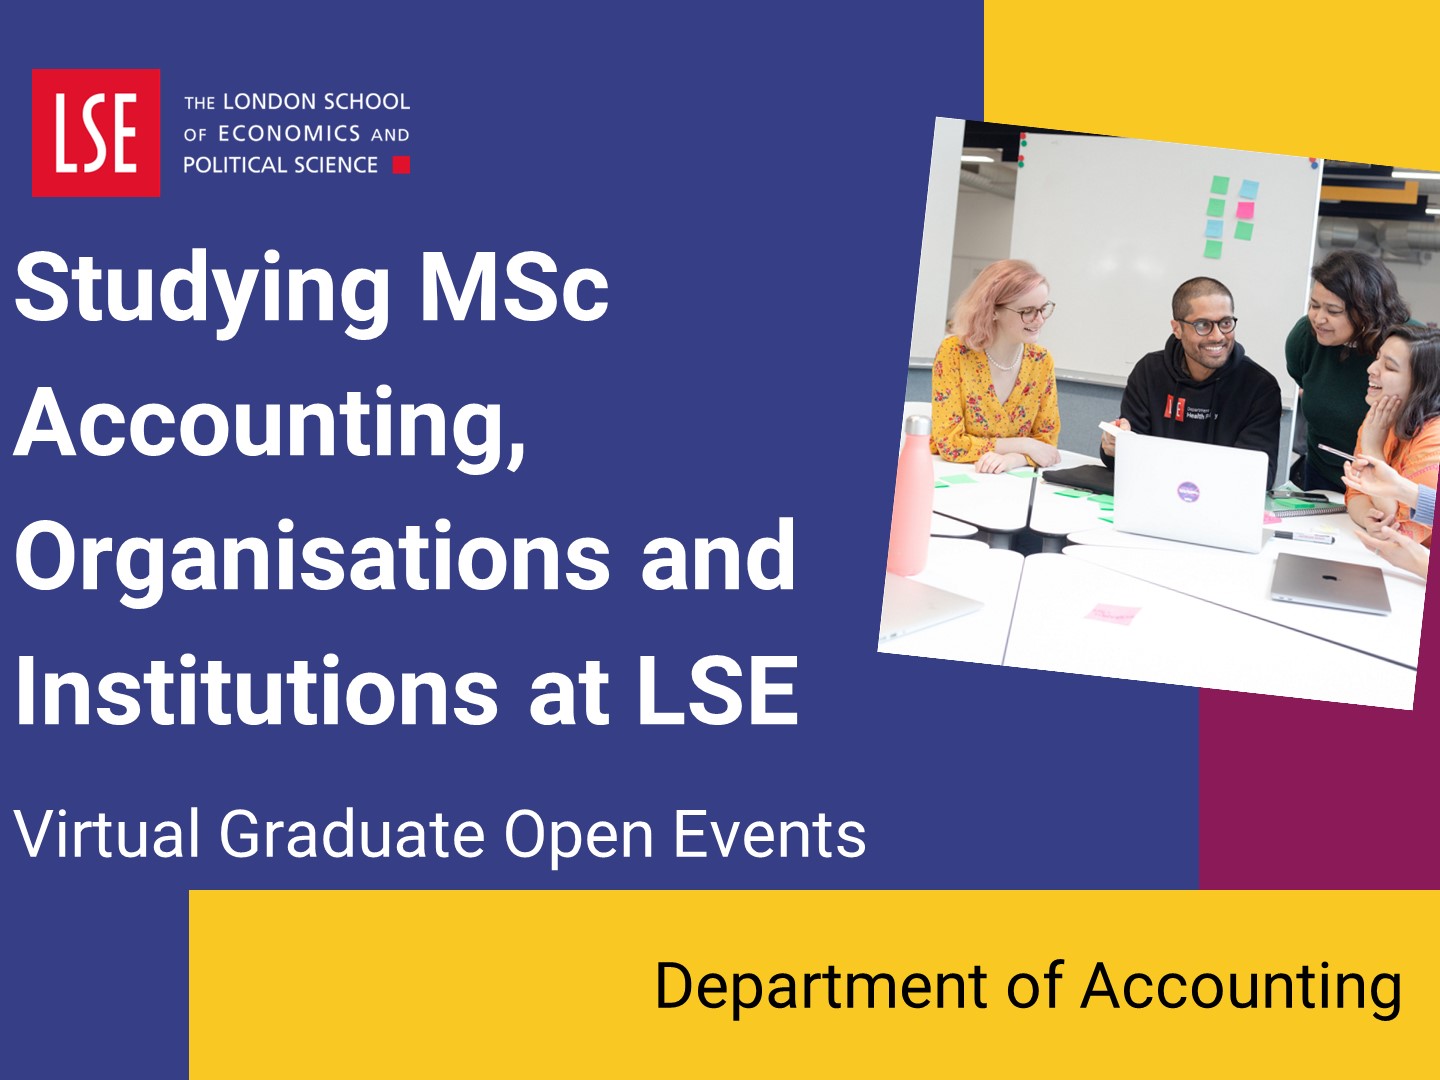 Studying MSc Accounting, Organisations and Institutions at LSE